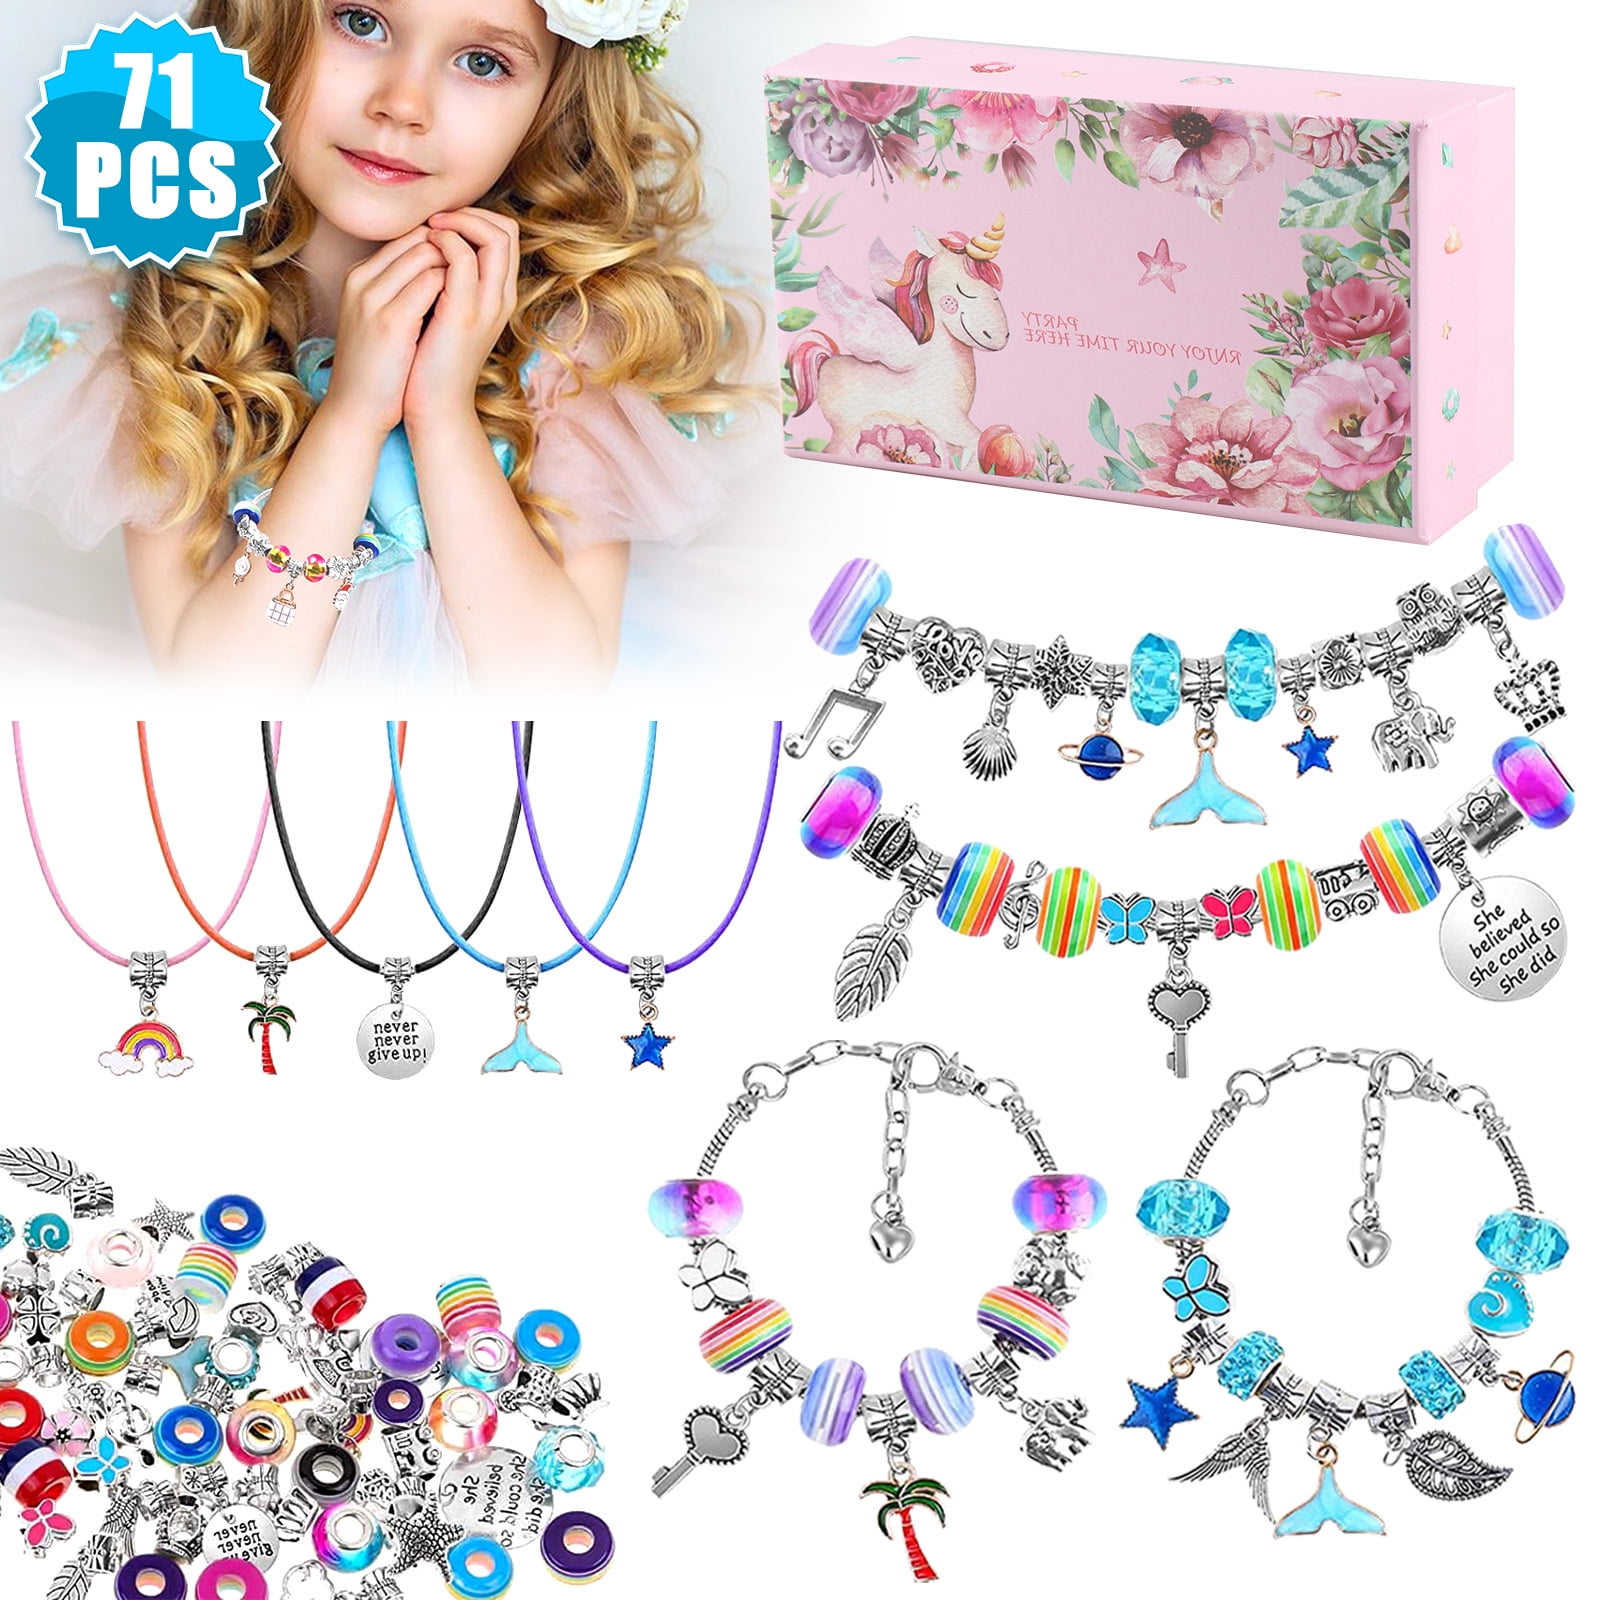 BDBKYWY Charm Bracelet Making Kit & Unicorn/Mermaid Girl Toy- ideal Crafts  for Girls Ages 8-12 The Perfect Gifts for Girls who Inspire Imagination and  Create Magic with Art Set and Jewelry Making